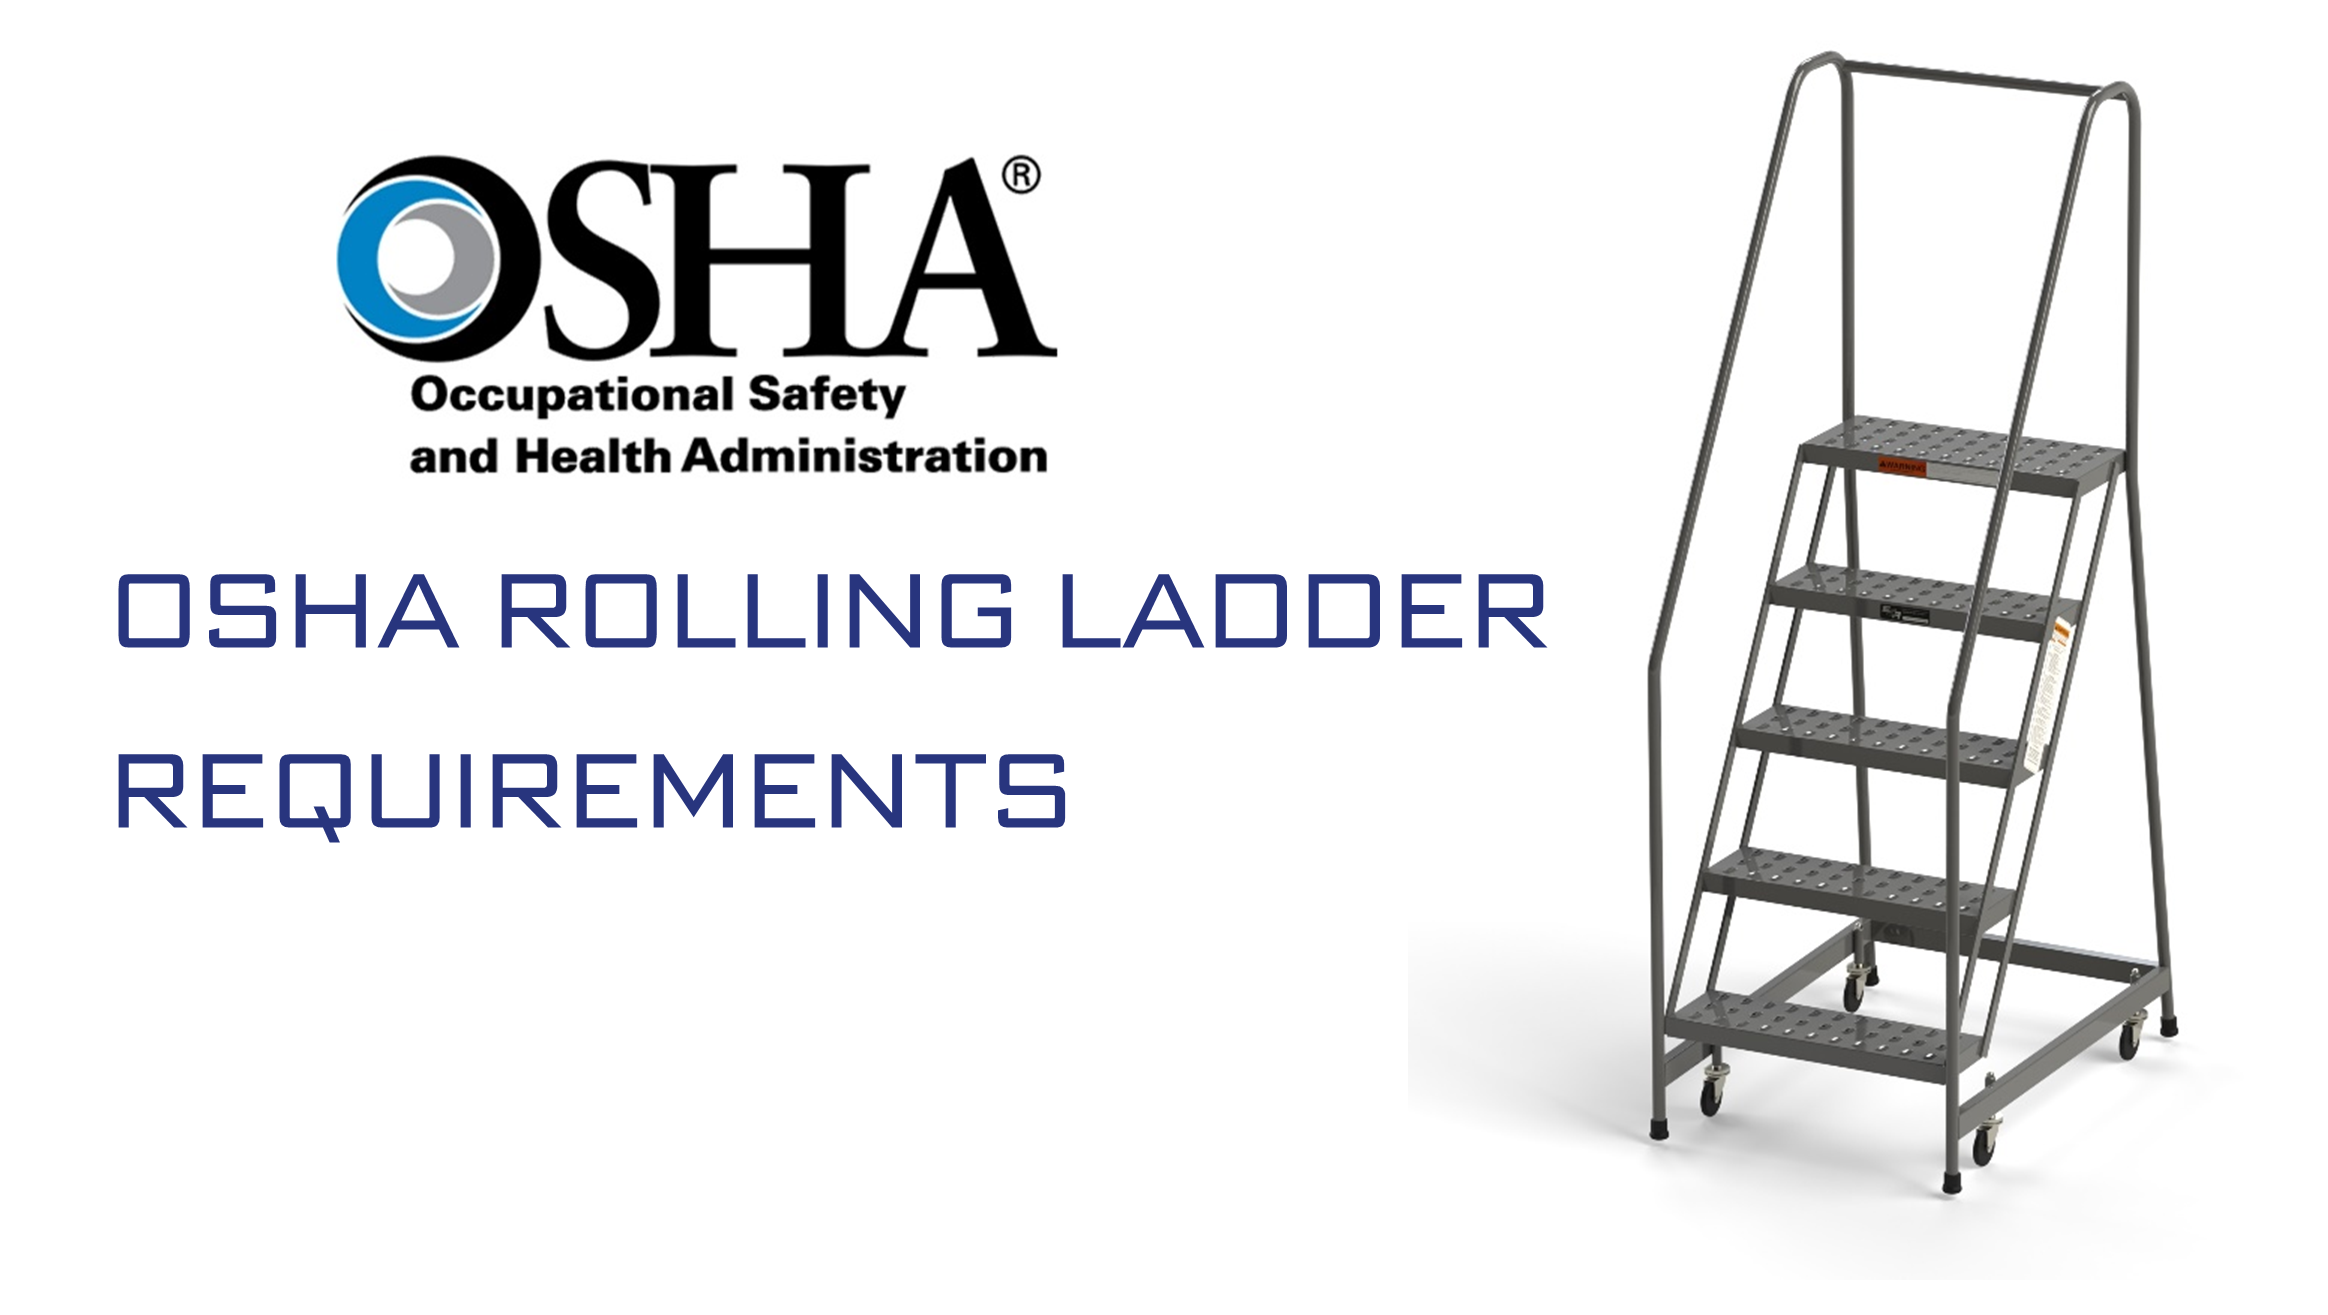 Commercial ladder safety standards compliance